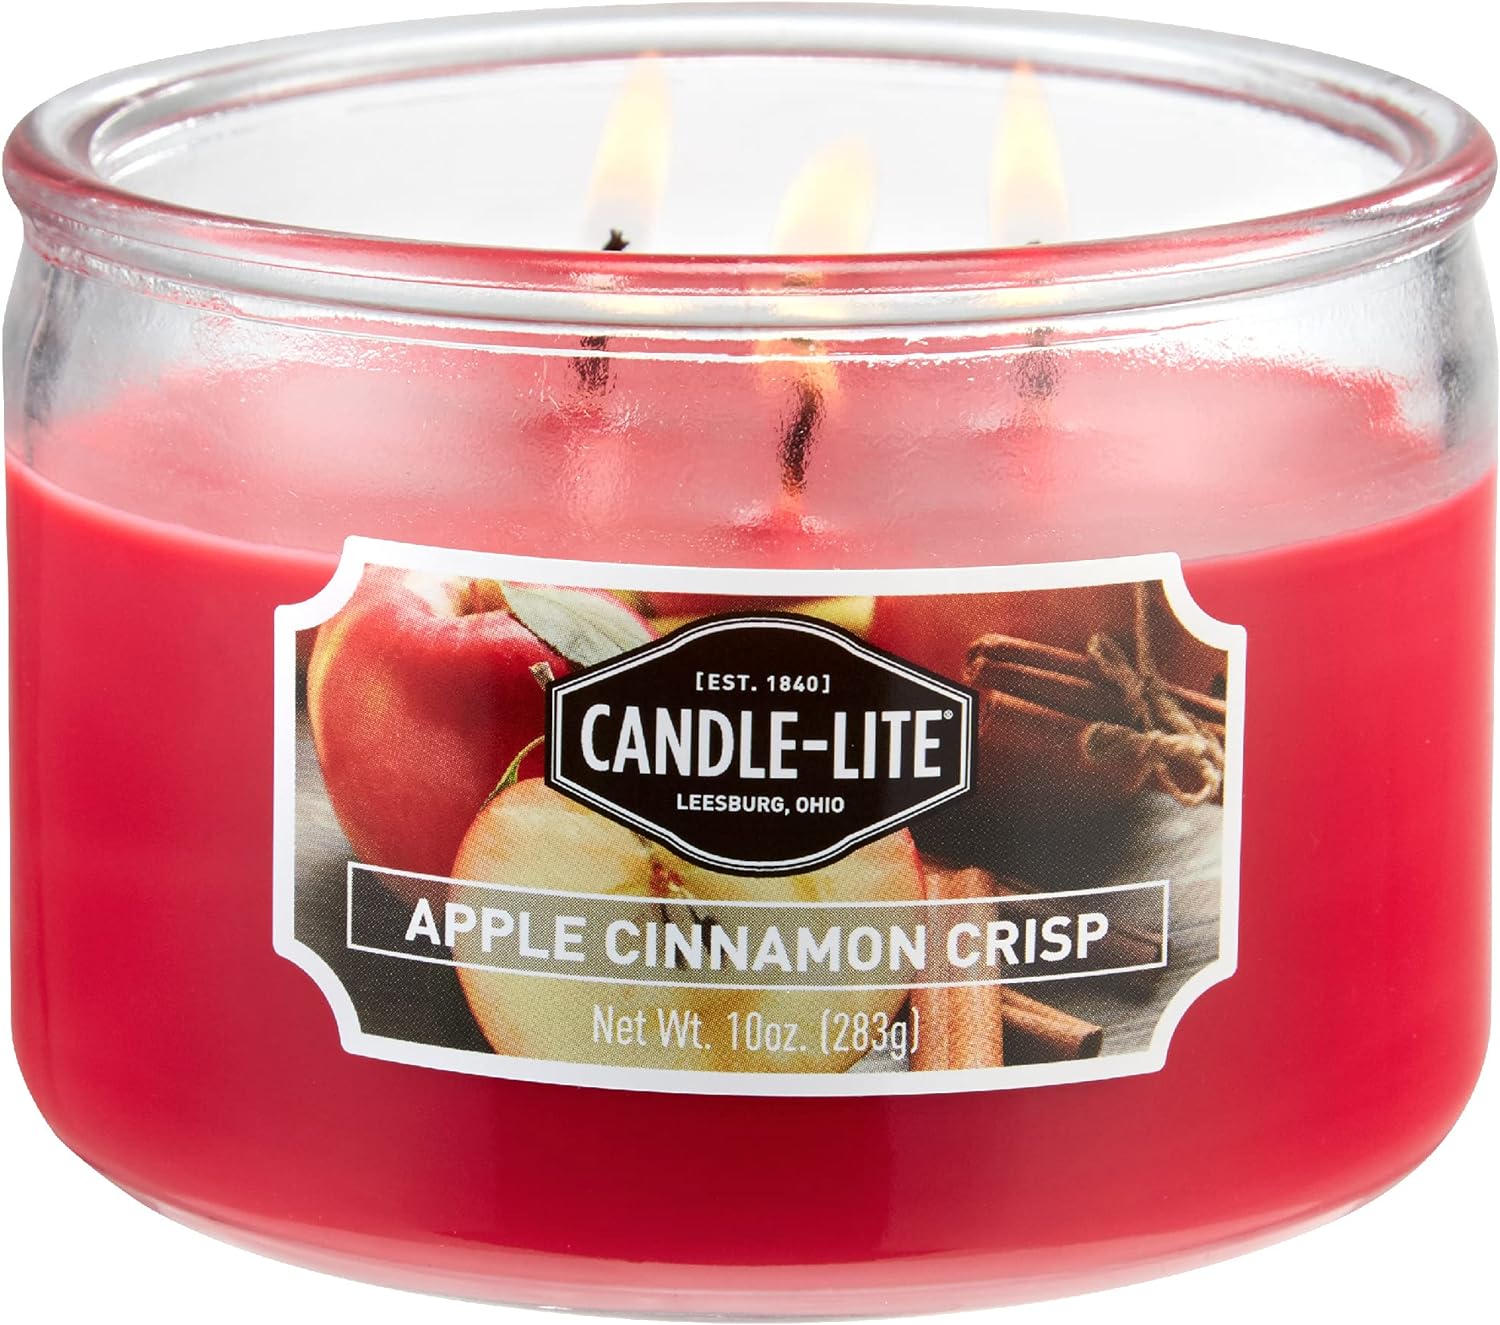 10-Oz Candle-lite Scented 3-Wick Aromatherapy Candle (Apple Cinnamon Crisp) $3.80 w/ S&S + Free Shipping w/ Prime or on $35+